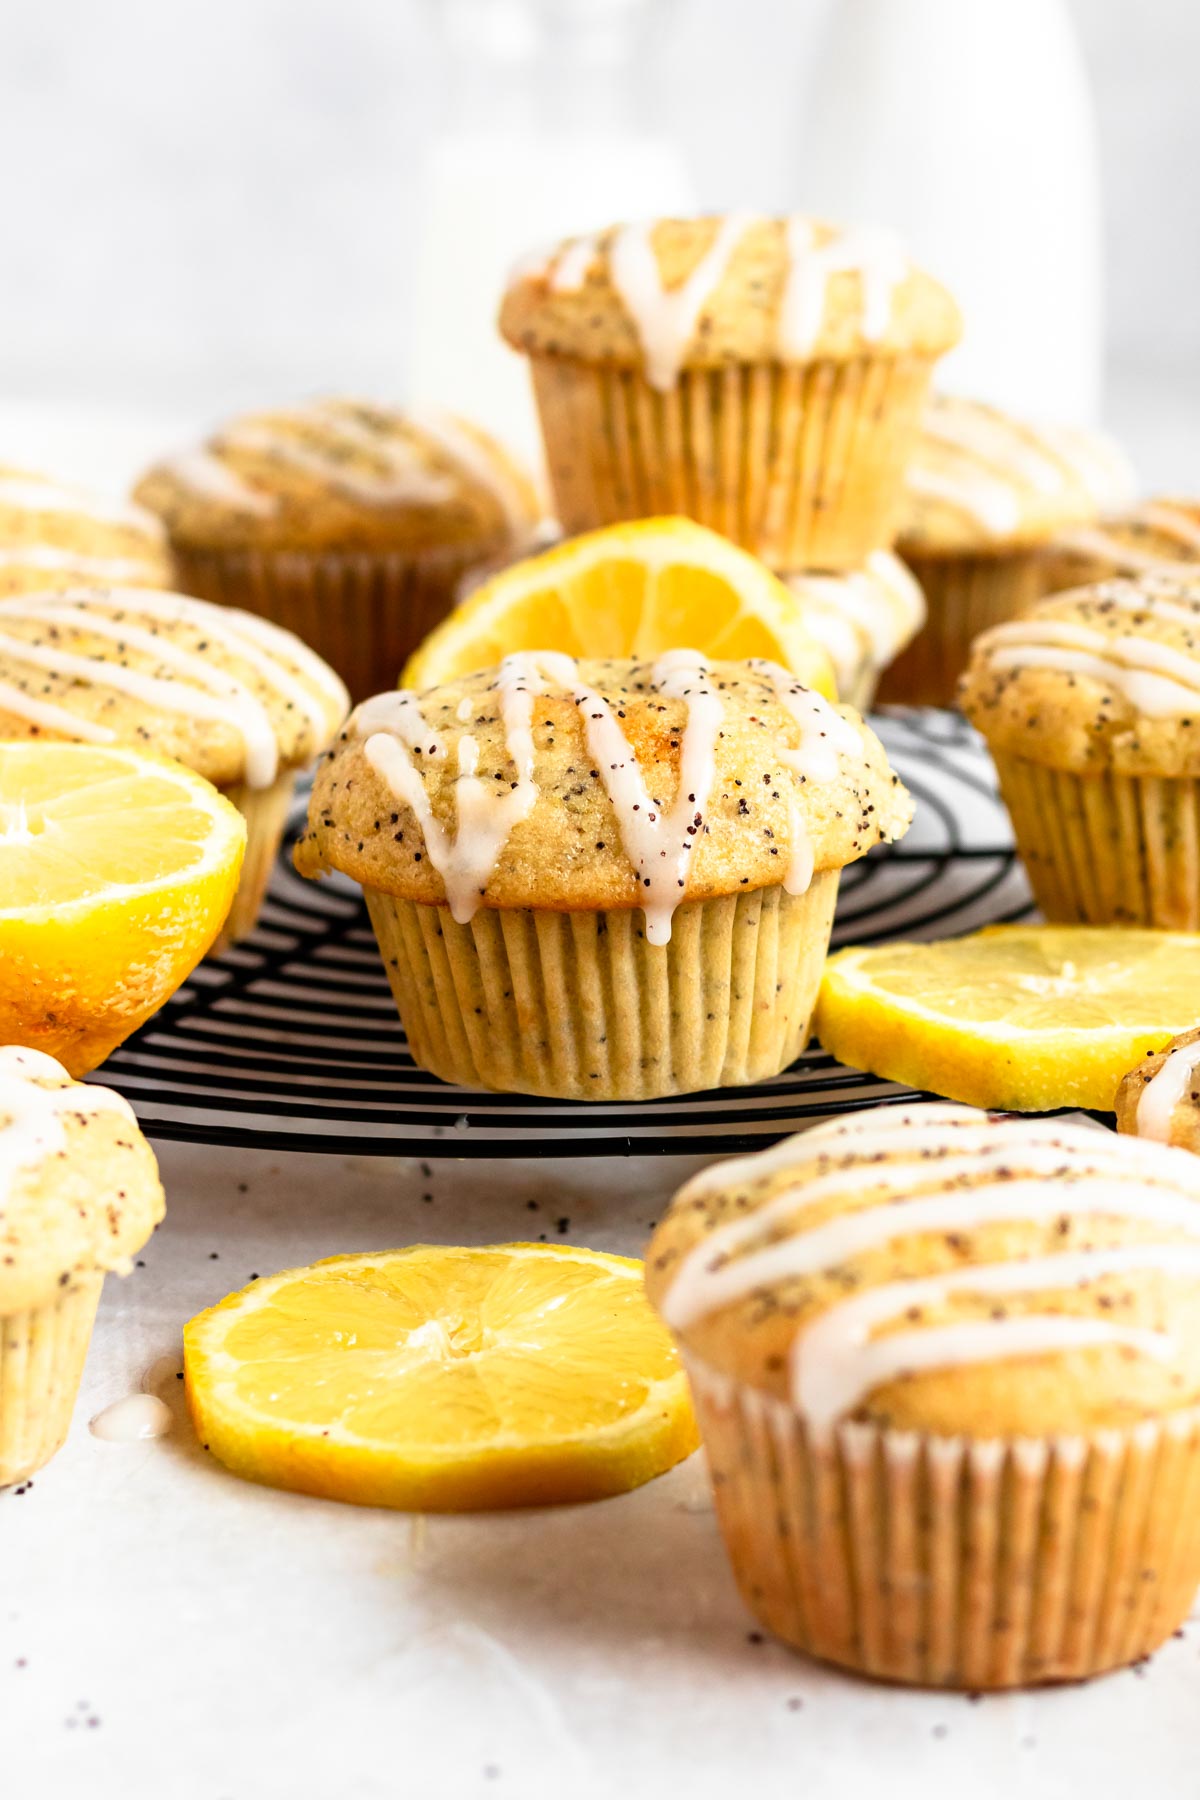 Lemon poppy seed muffins with lemon glaze on a round cooling rack.